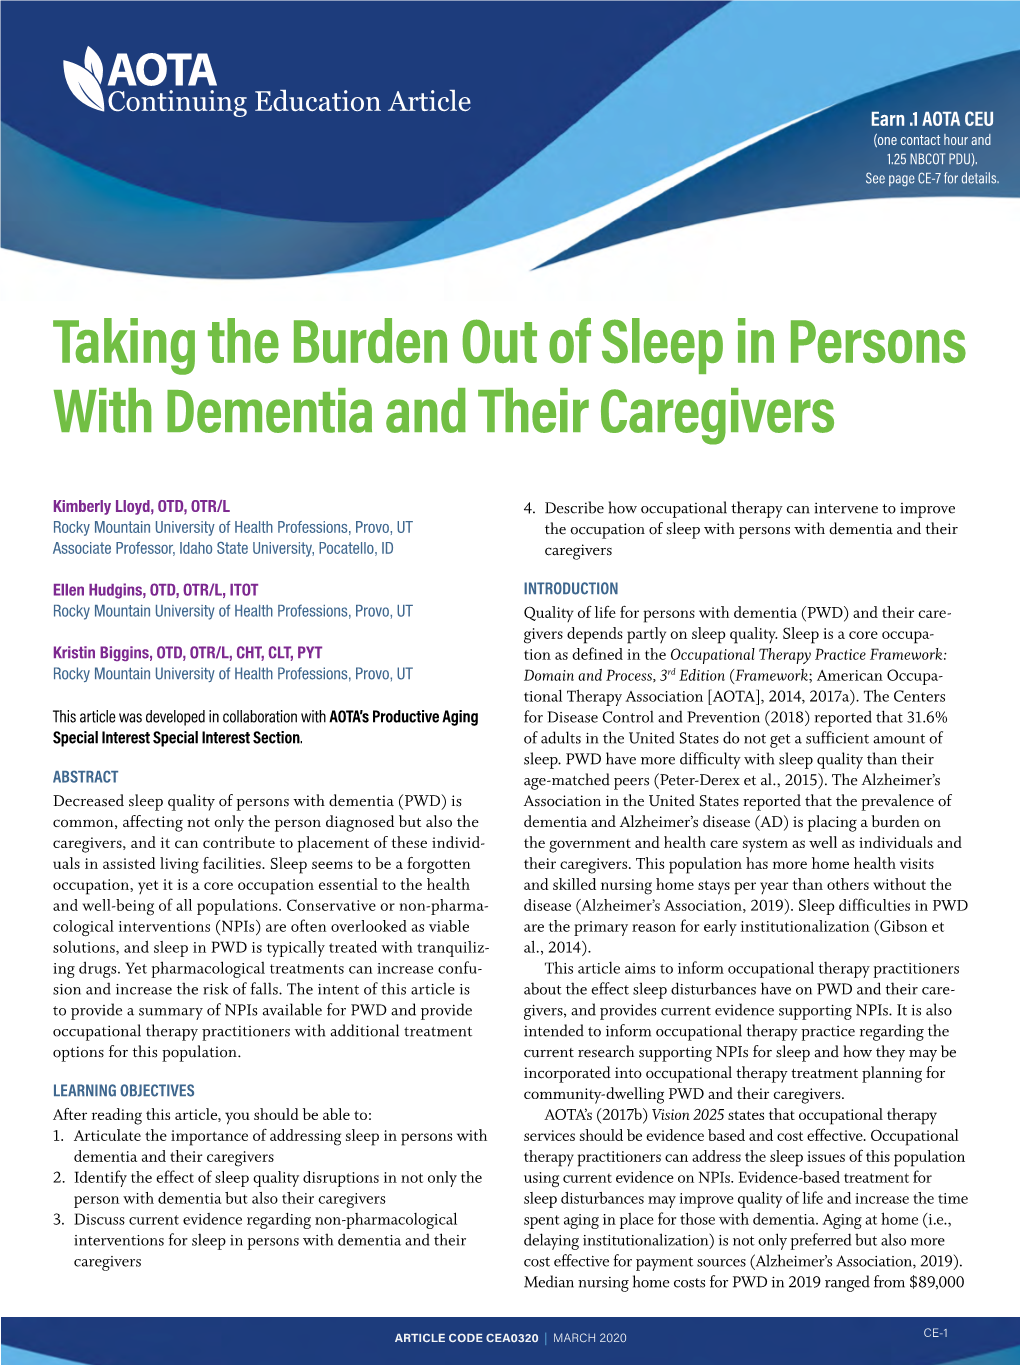 Taking the Burden out of Sleep in Persons with Dementia and Their Caregivers